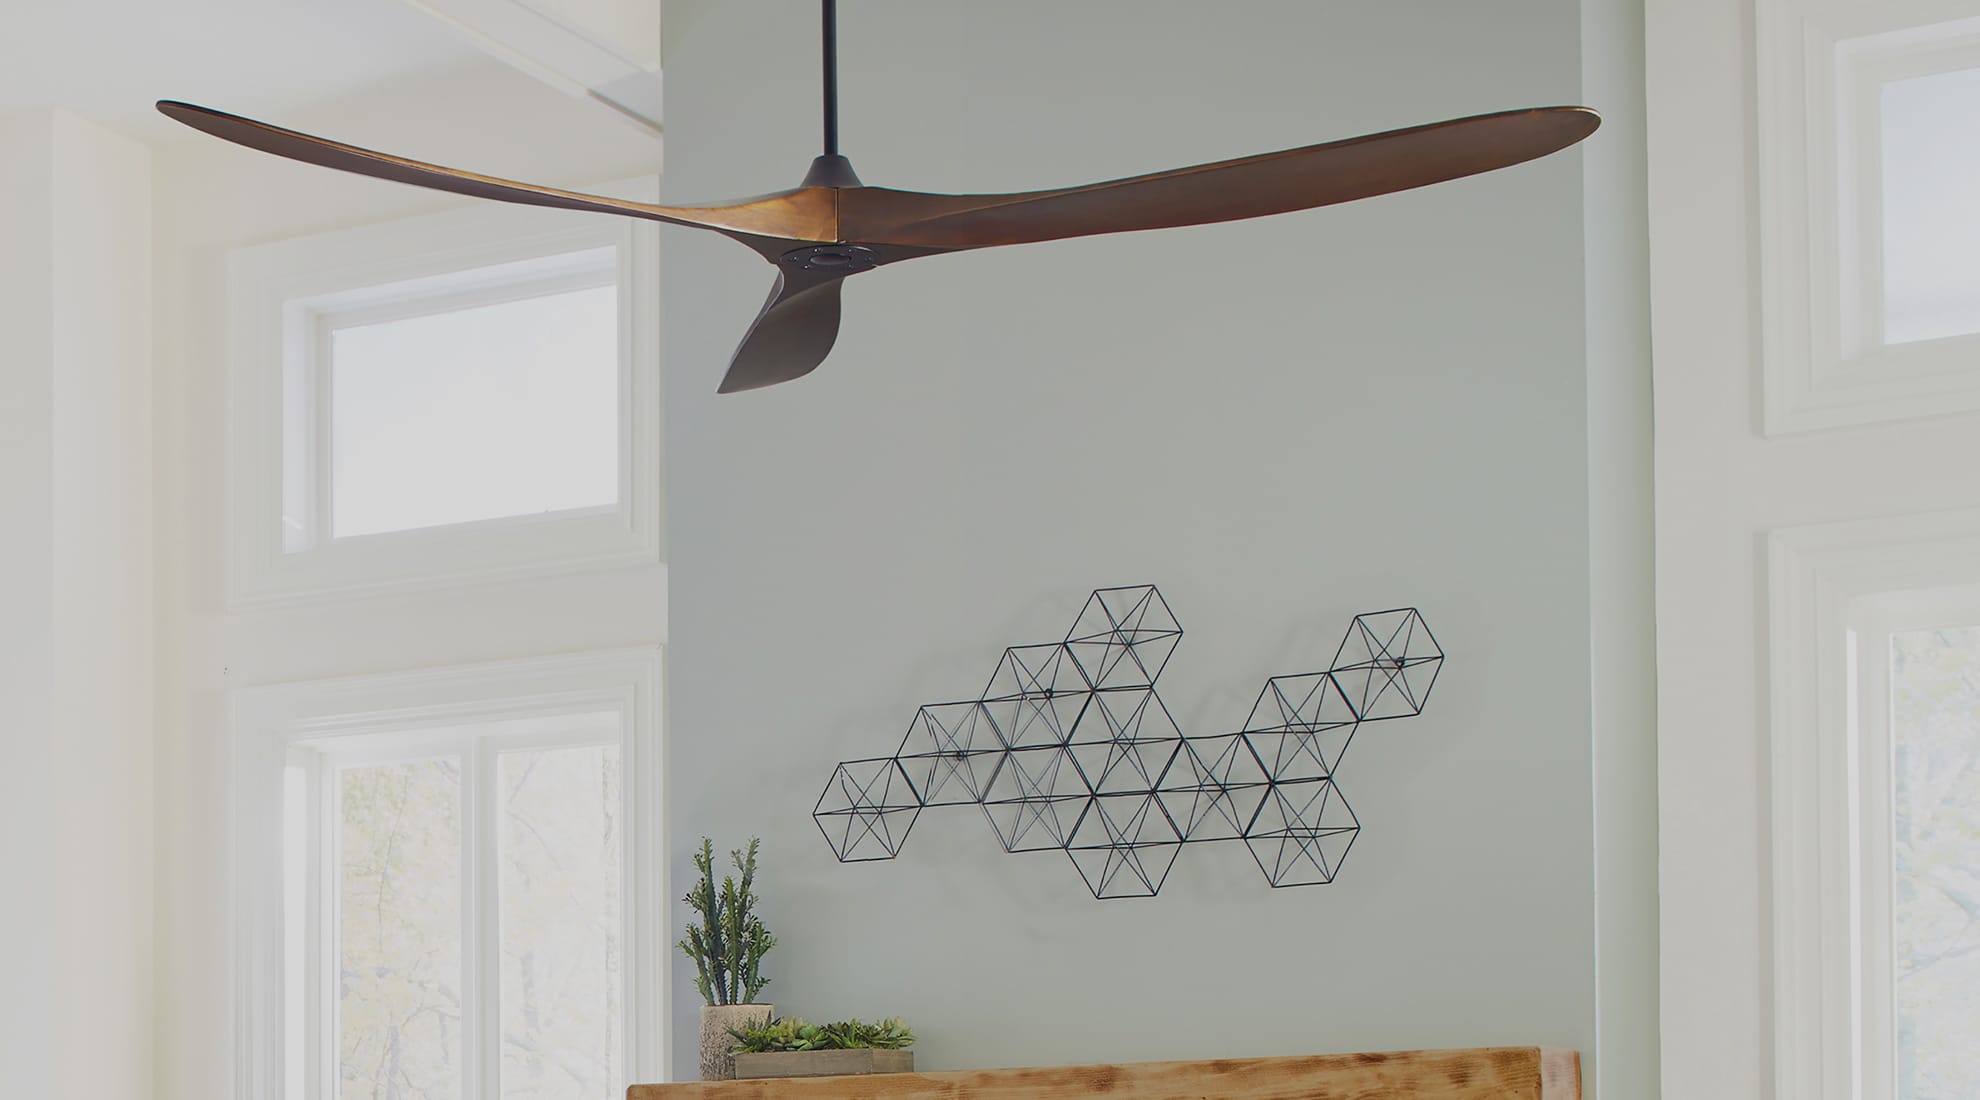 Ceiling Fan Sizes Size, What Size Ceiling Fan Do I Need For My Patio